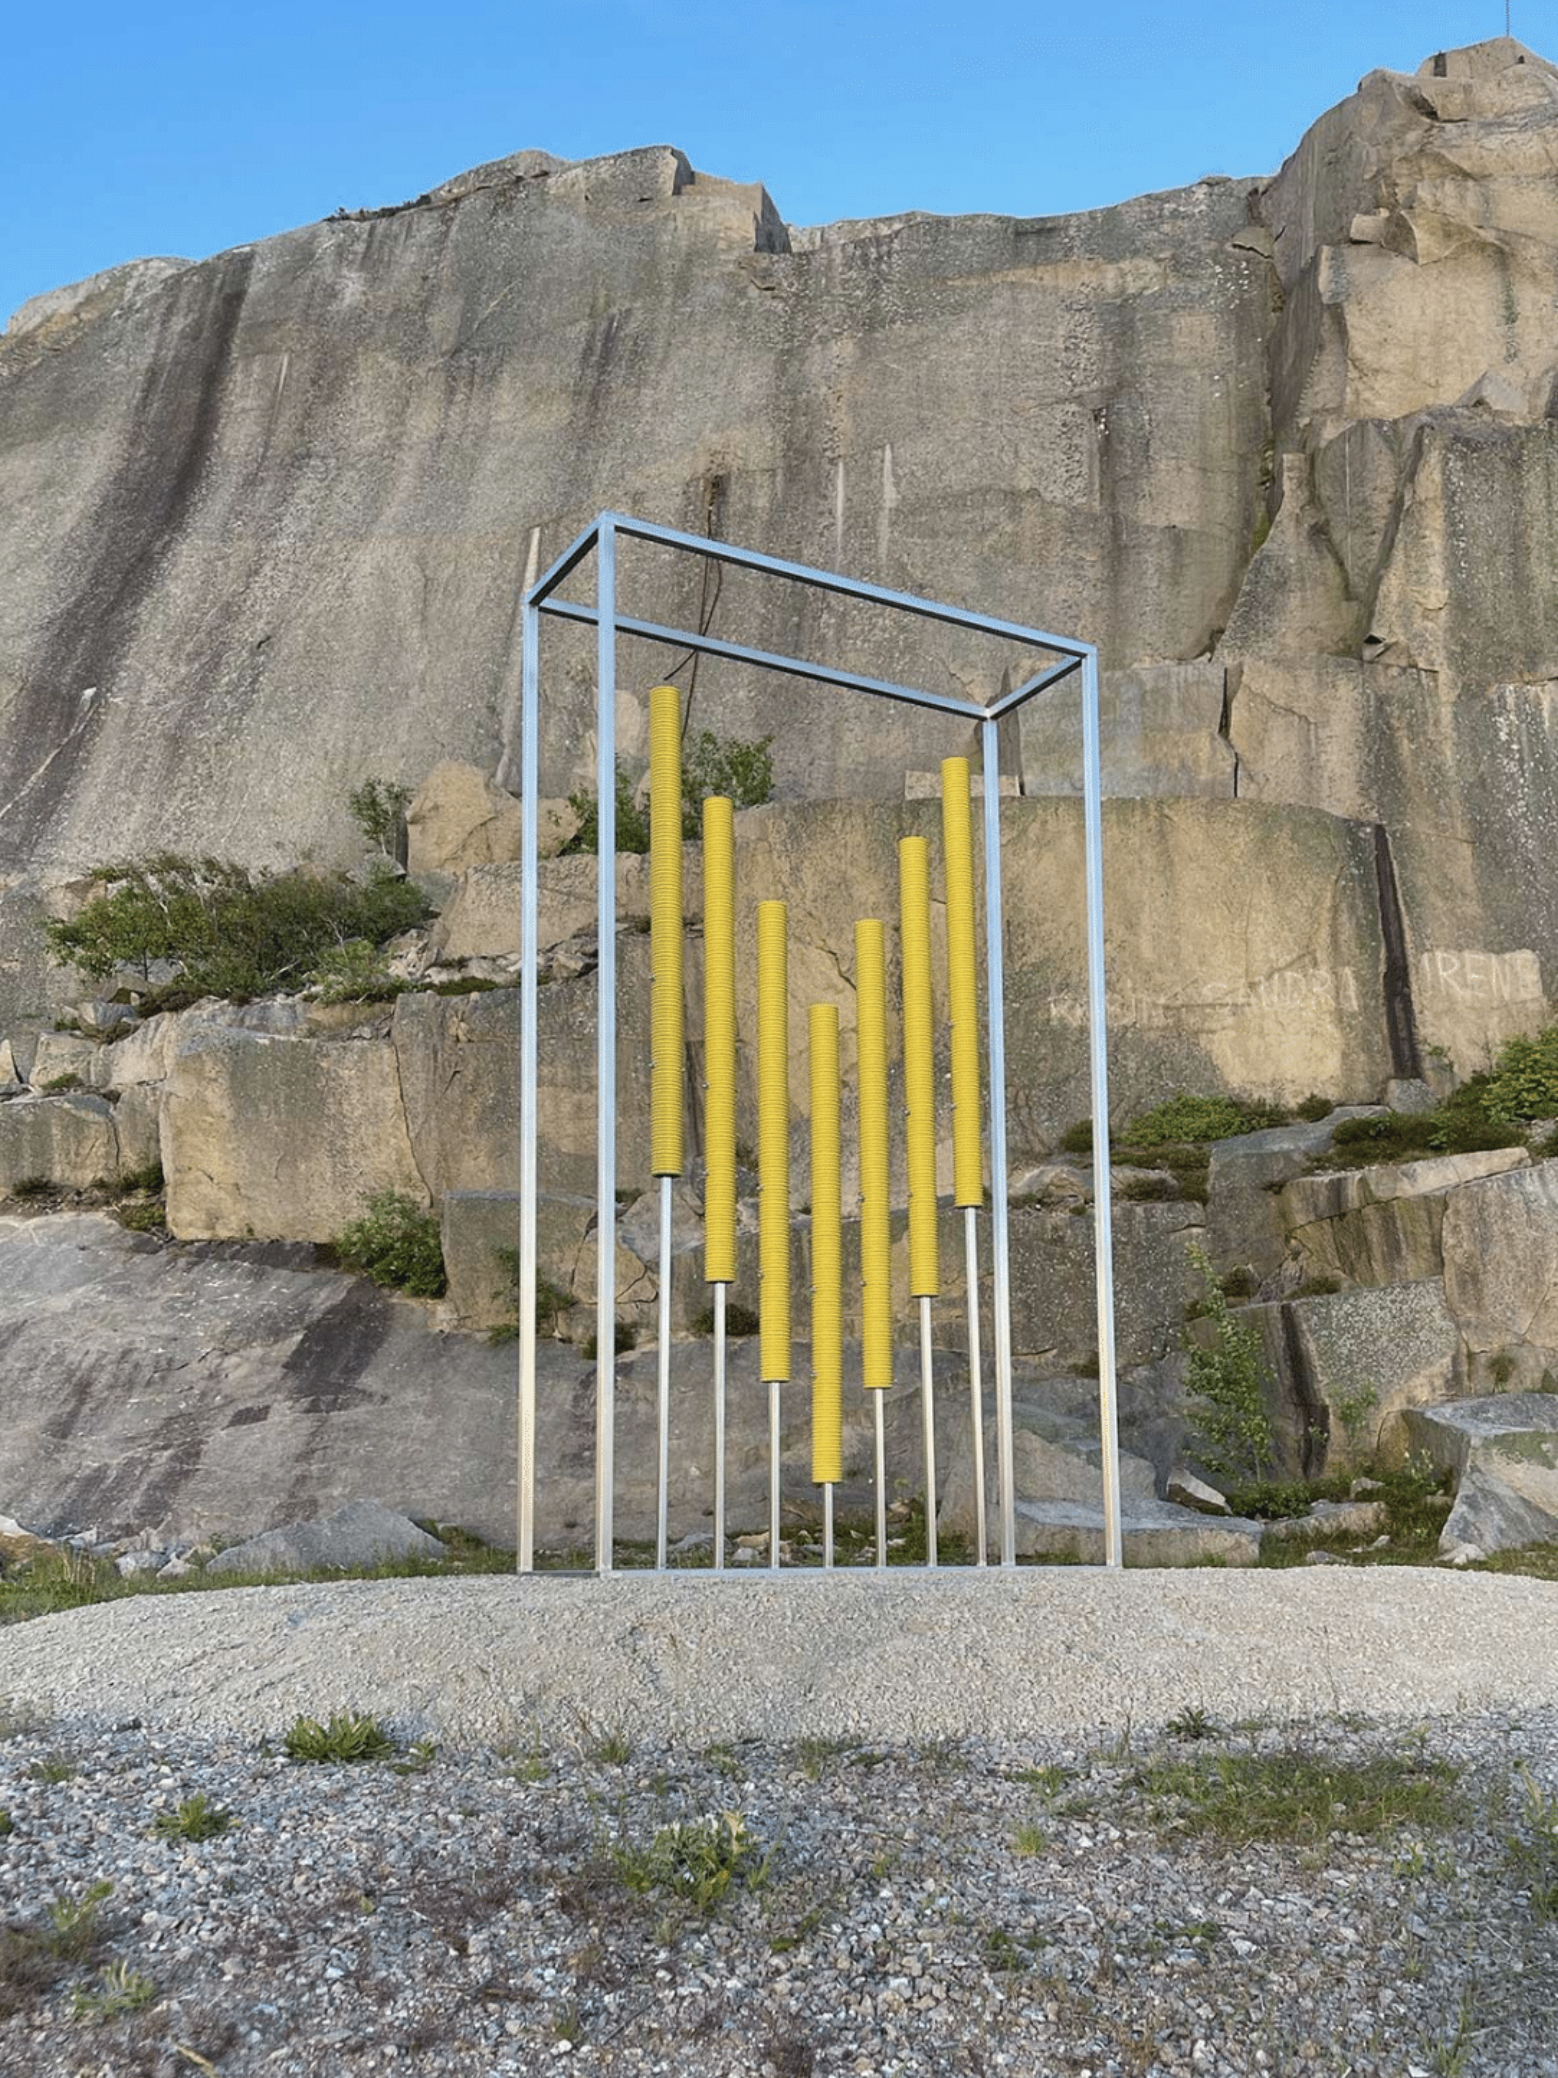 Phoenix, 2022, Stainless steel, cable protection pipes, 512 × 300 × 100 cm. Installation views and details Udden Skulpture, Norra kajen Hunnebostrand, Sweden